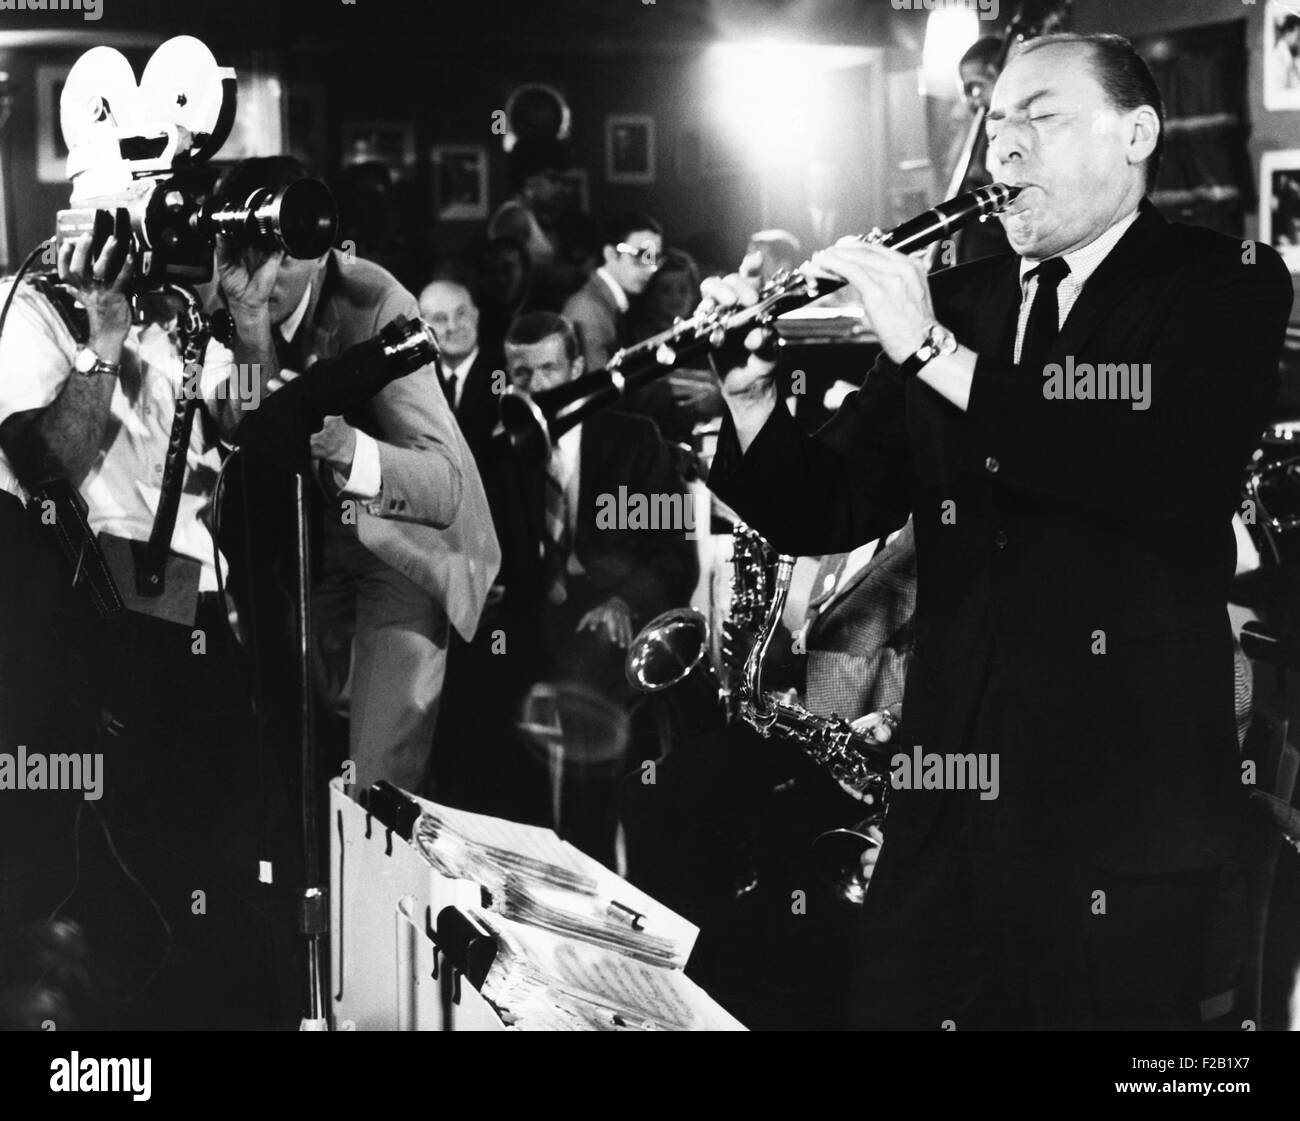 Woody Herman and his boys swing during a one night stand at a roadhouse. The performance was being filmed for an ABC-TV special, 'One Night Stands'. West Peabody, MA, 1967. (CSU 2015 7 396) Stock Photo